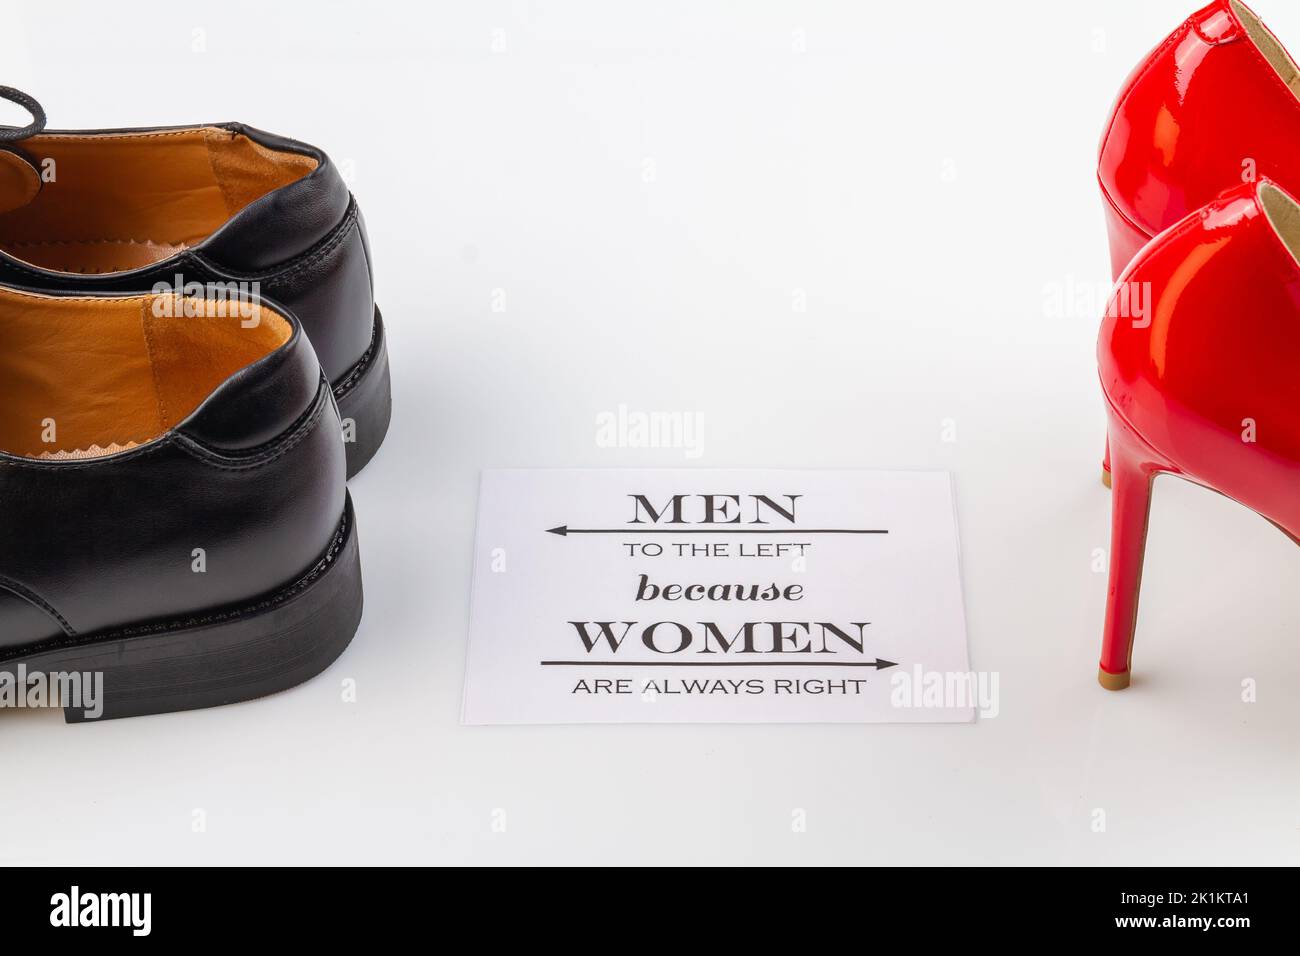 Men to the left because women are always right. Mens and womens shoes on white surface. Stock Photo